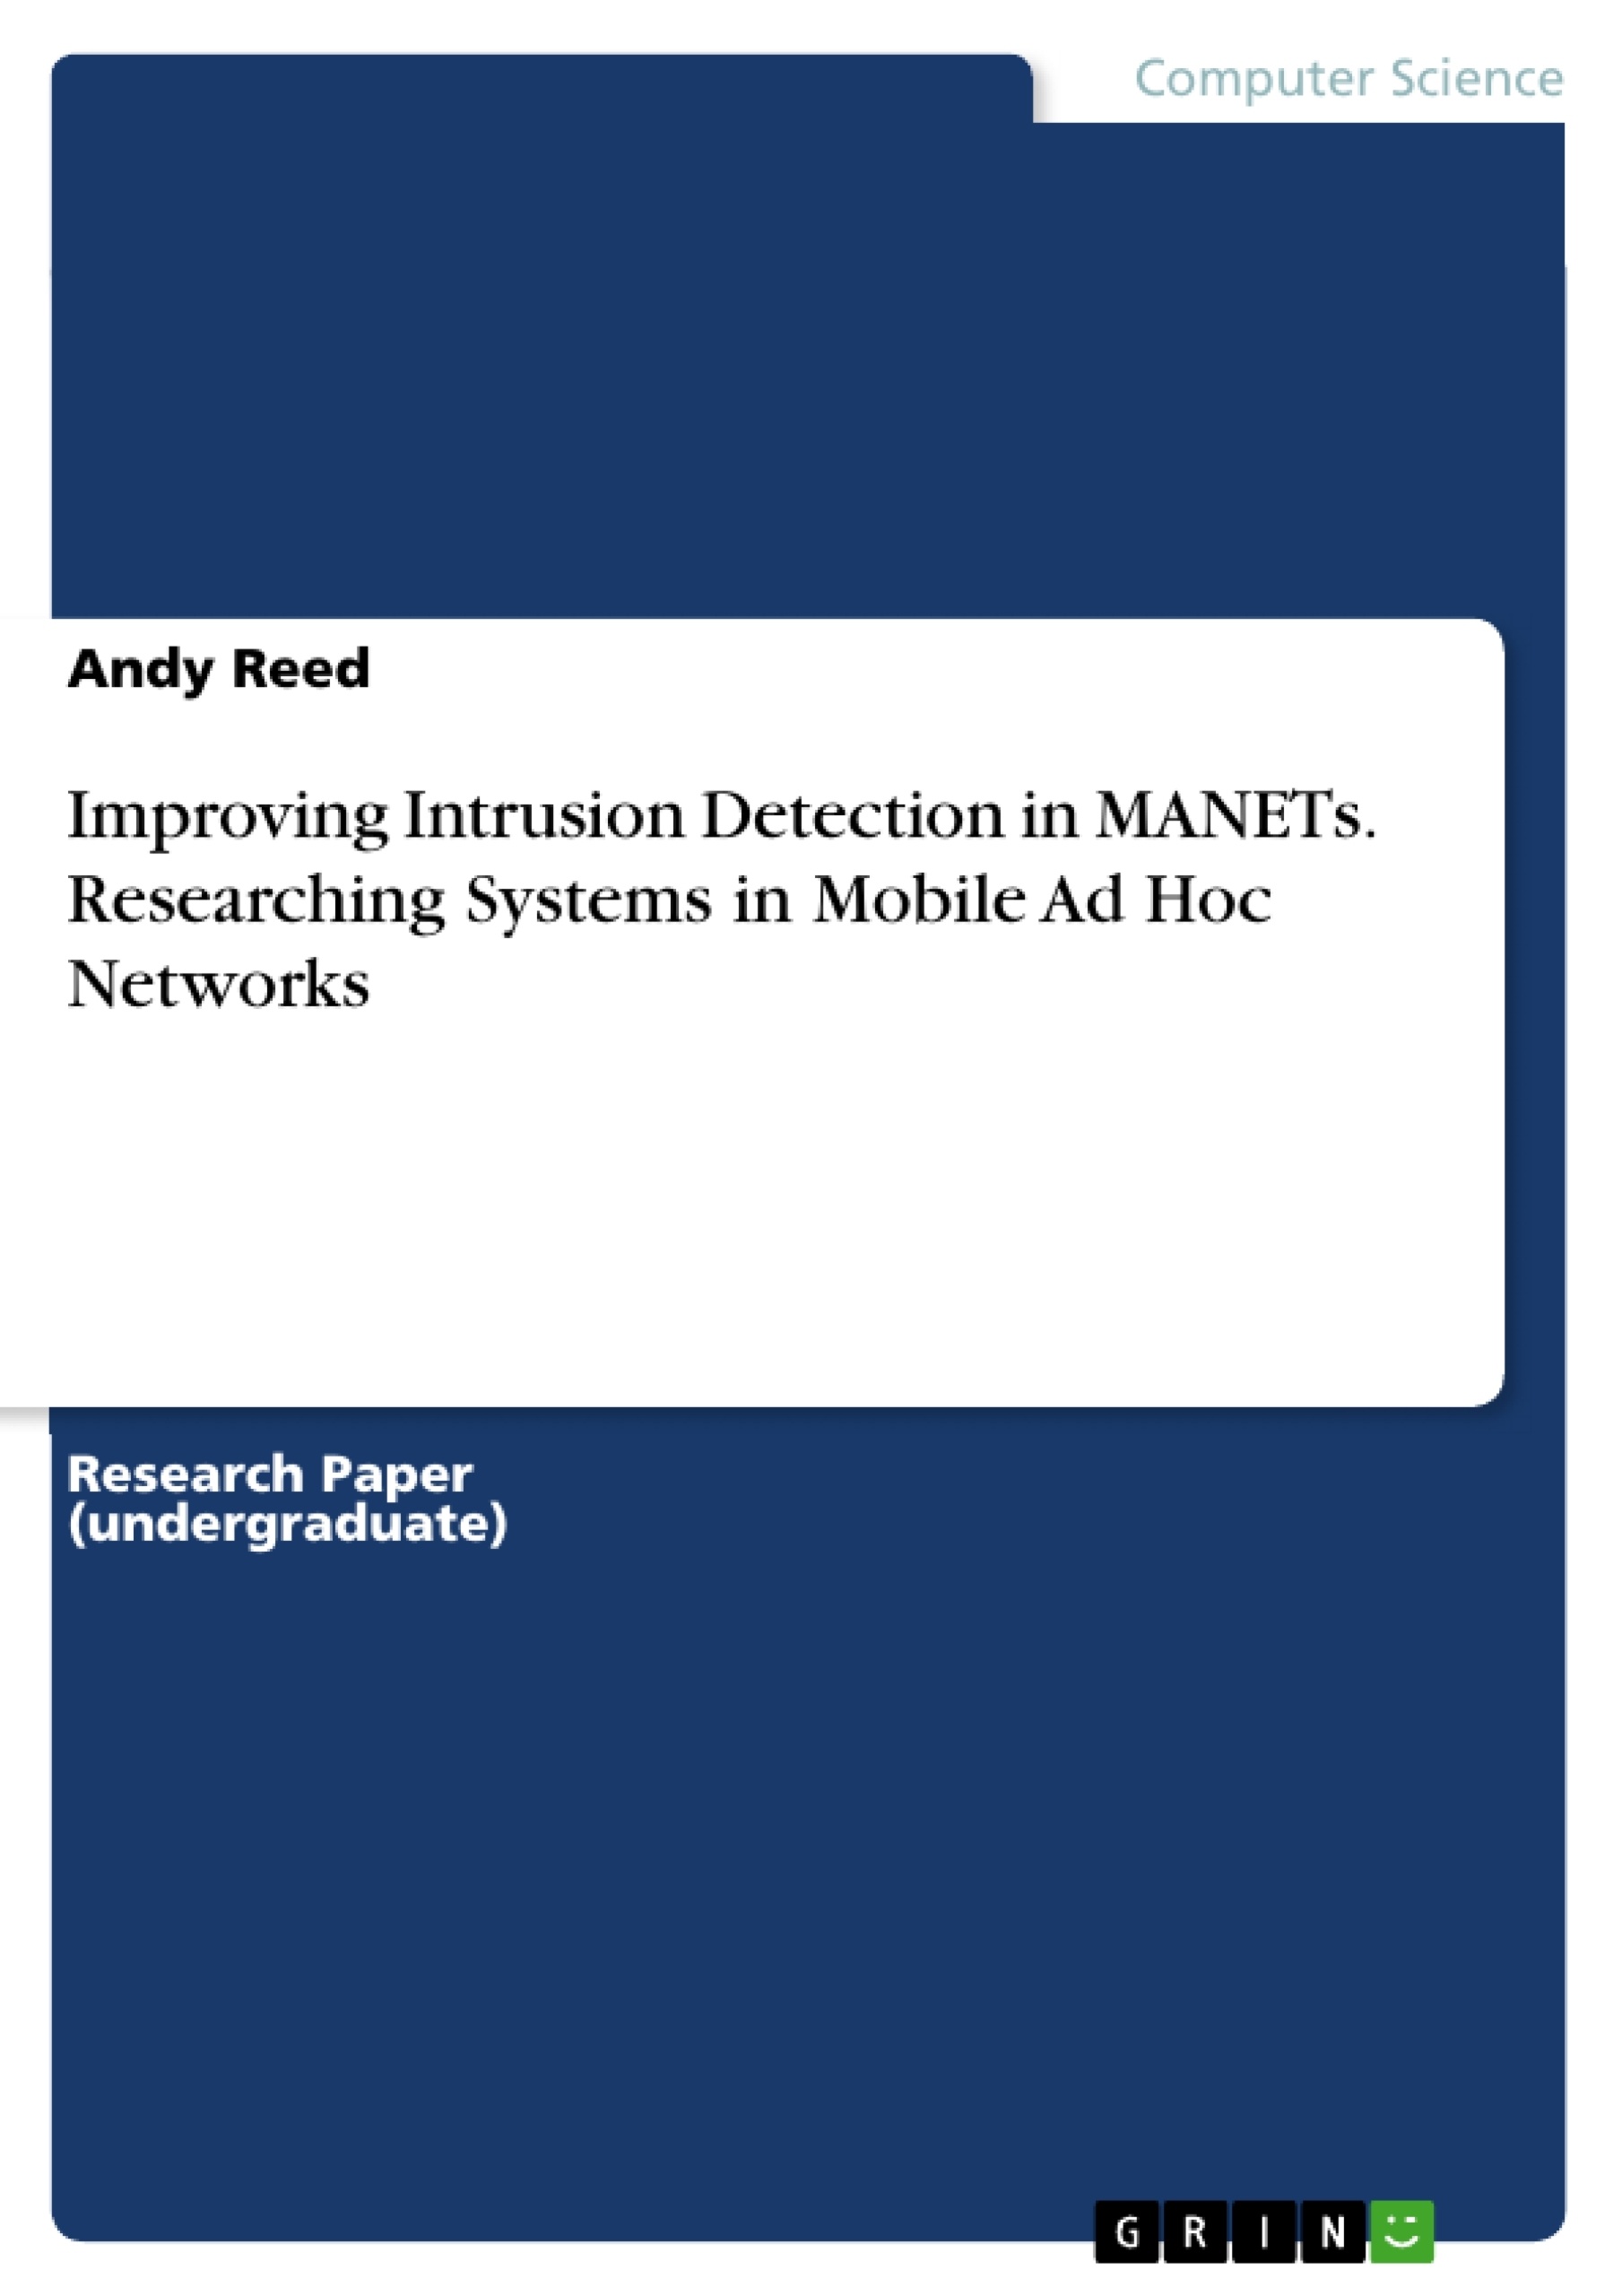 Título: Improving Intrusion Detection in MANETs. Researching Systems in Mobile Ad Hoc Networks